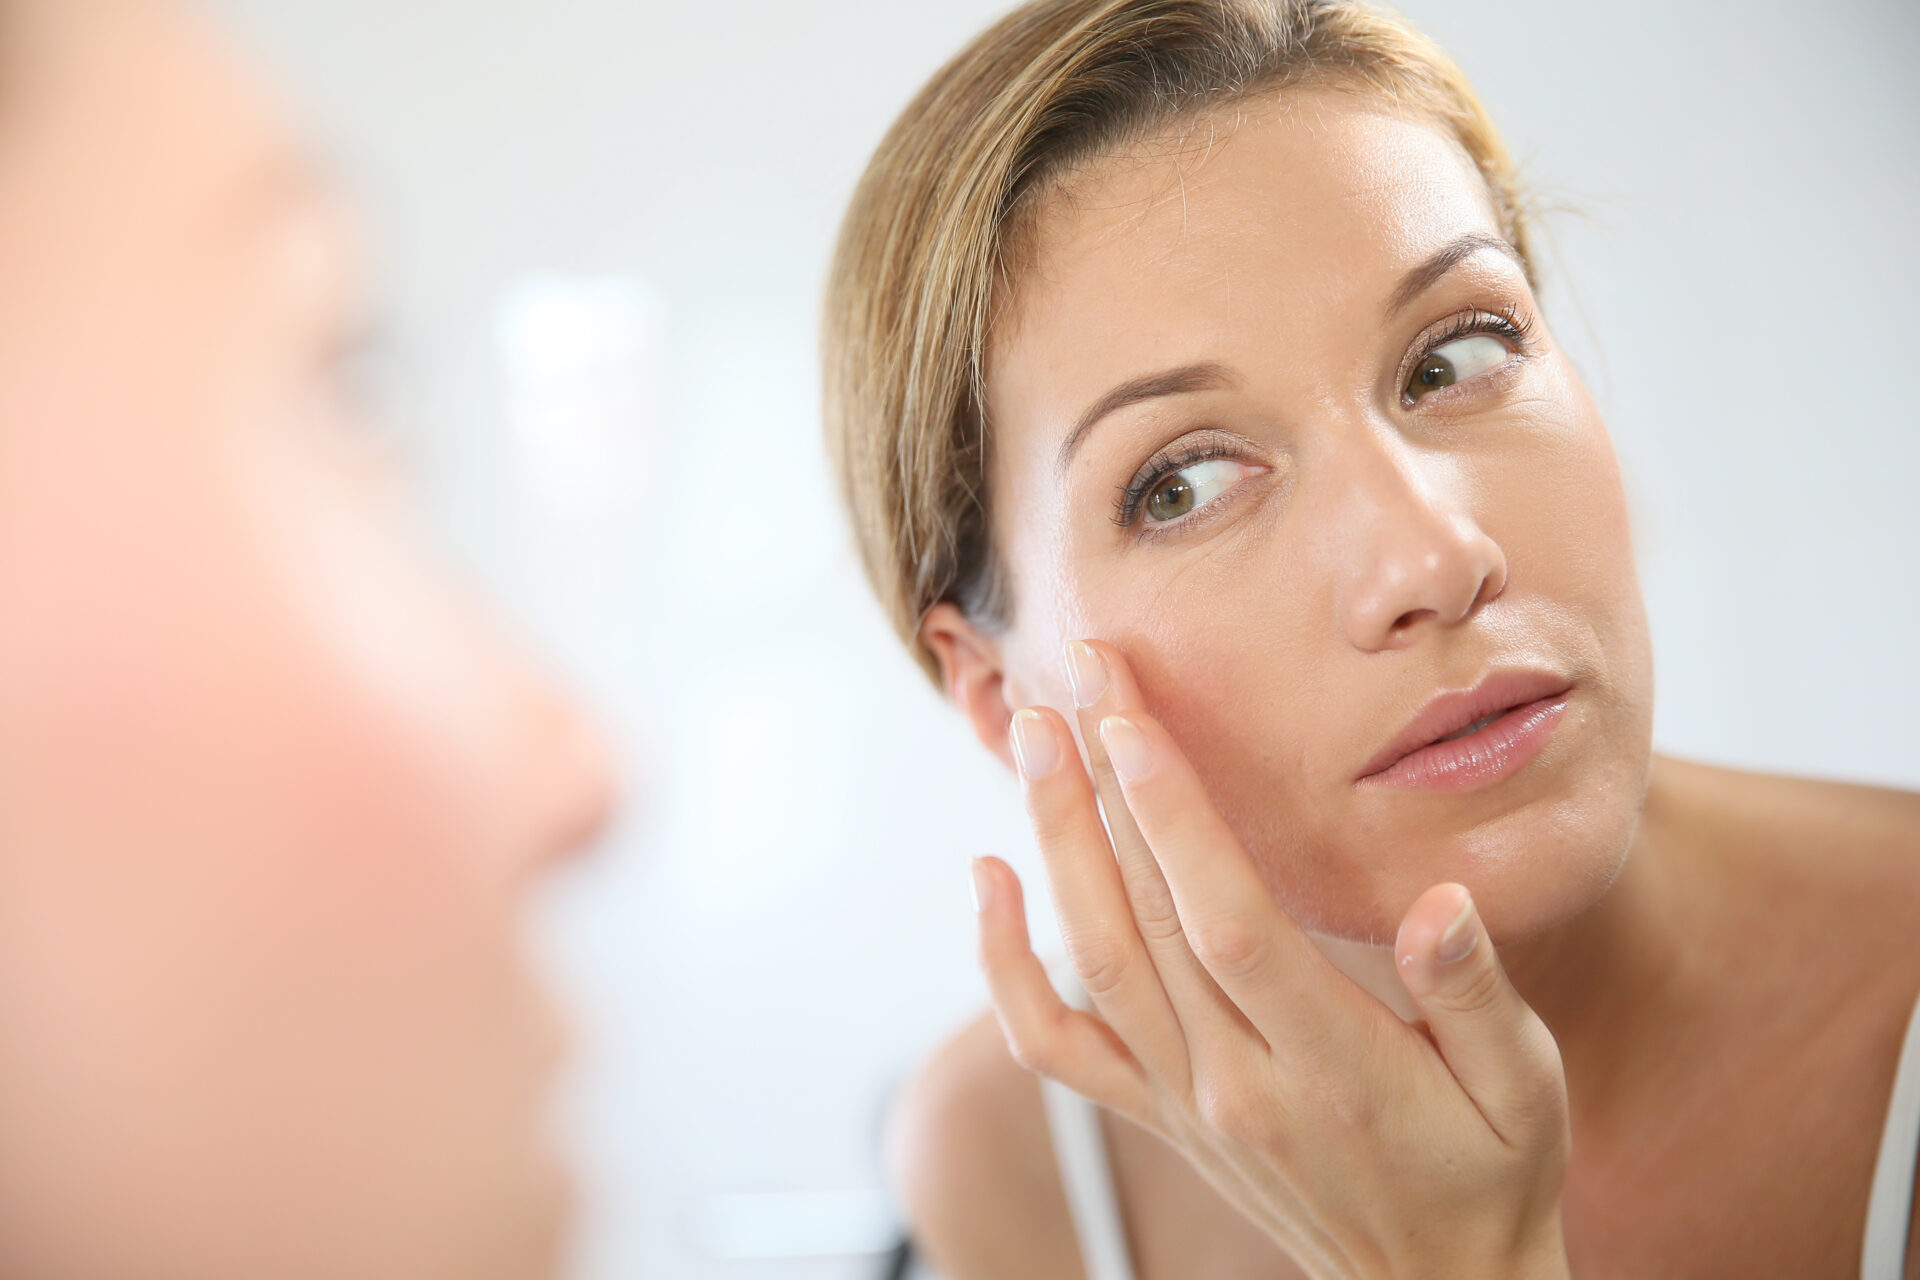 Woman looks at herself in the mirror and strokes her cheek with her finger.